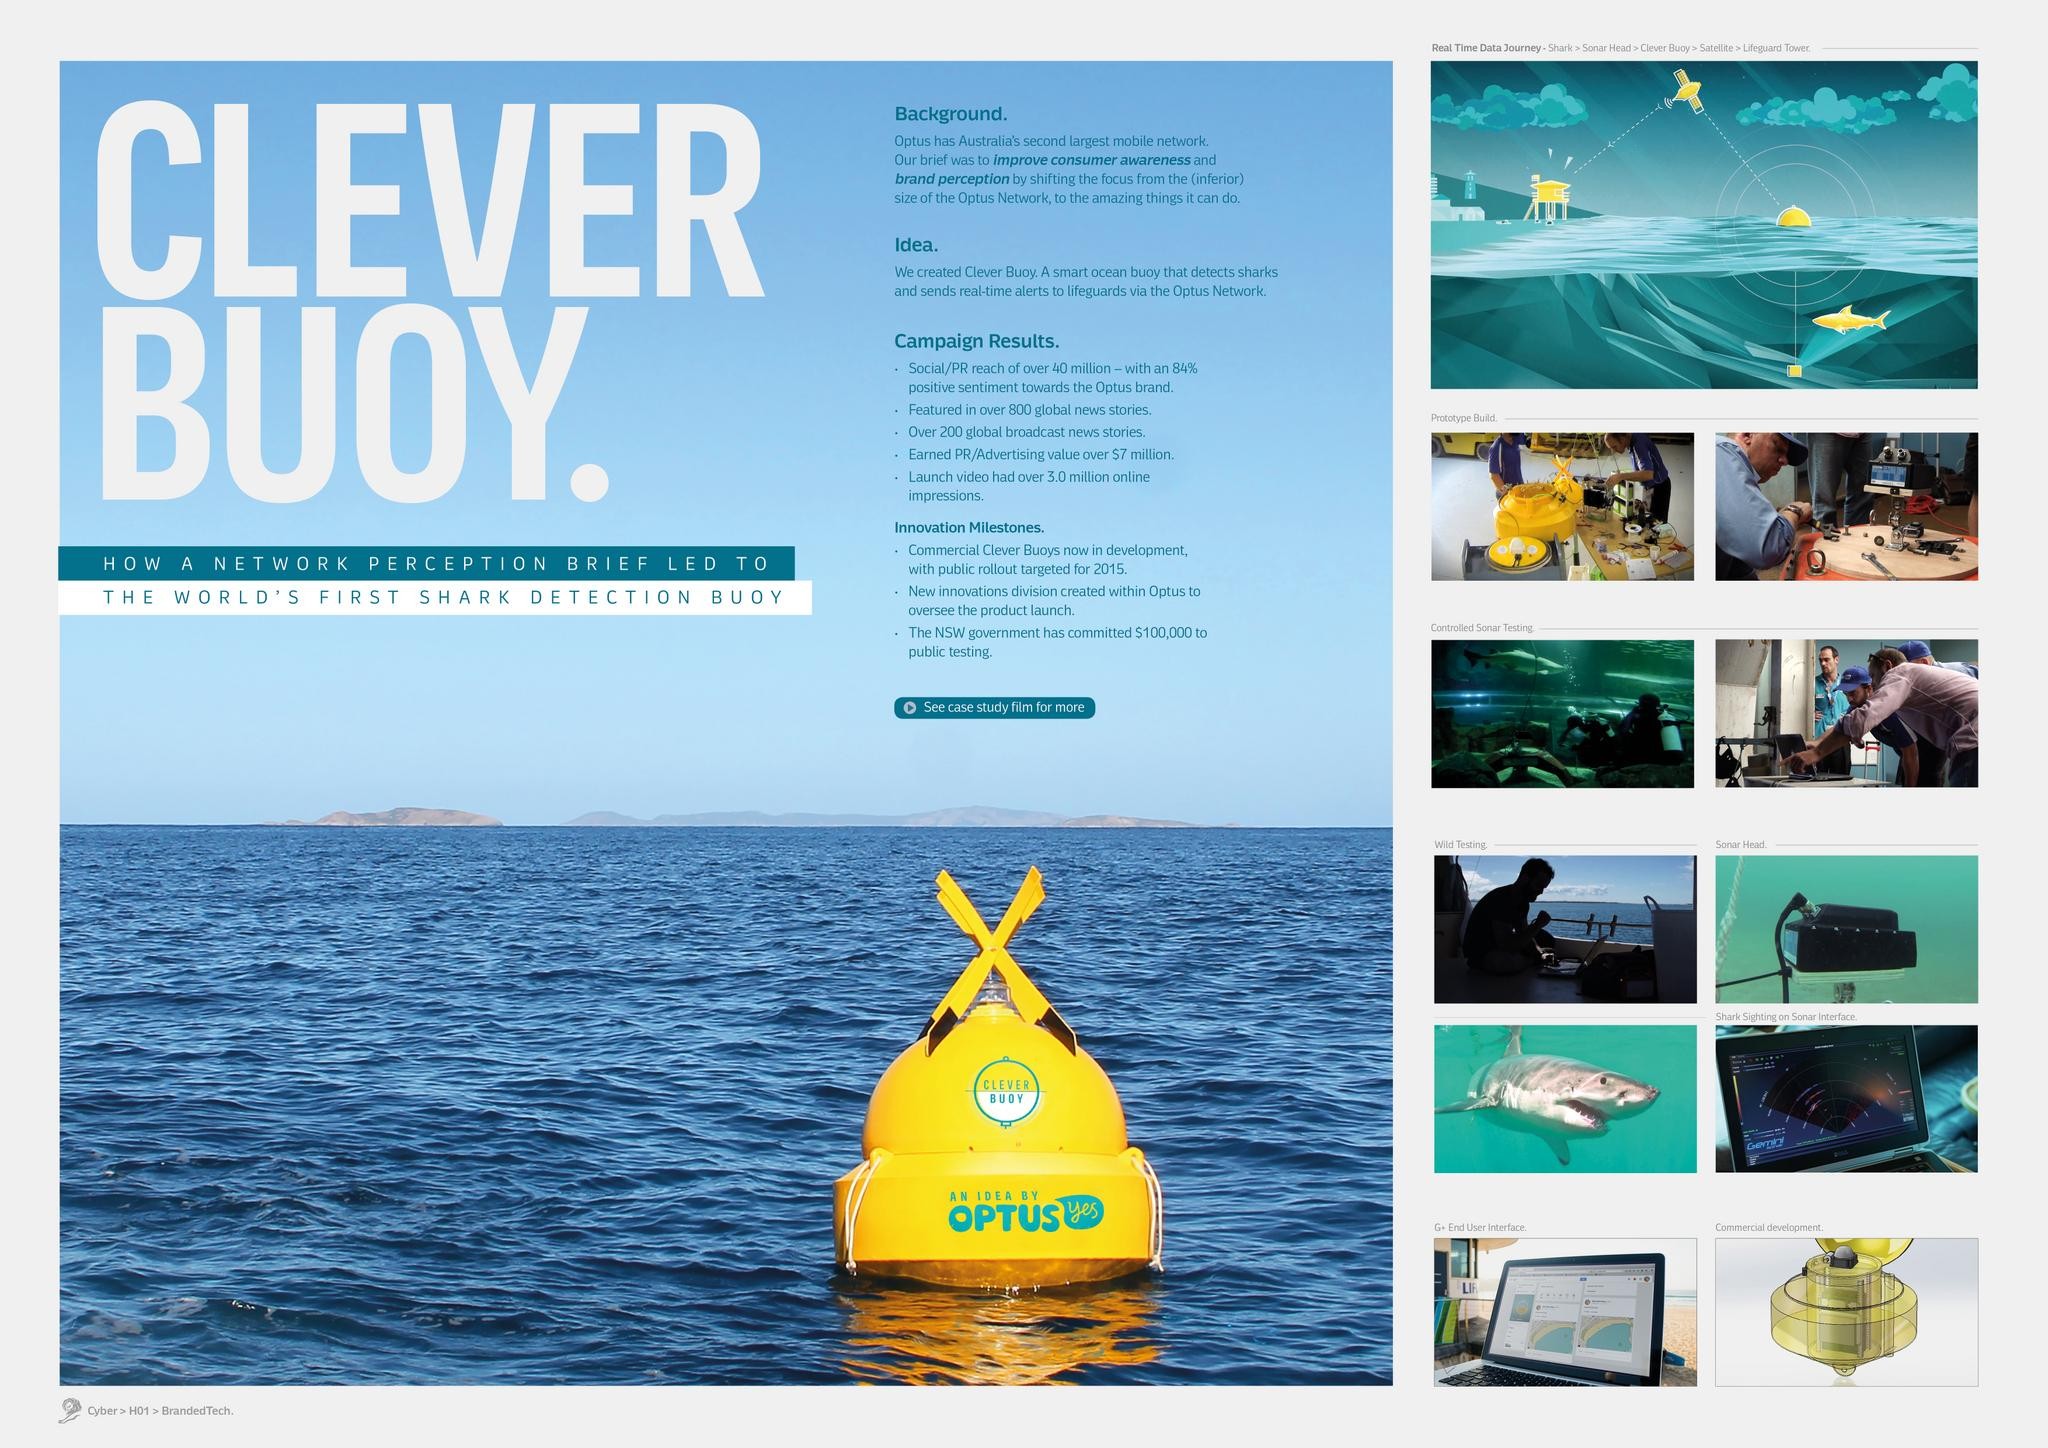 CLEVER BUOY